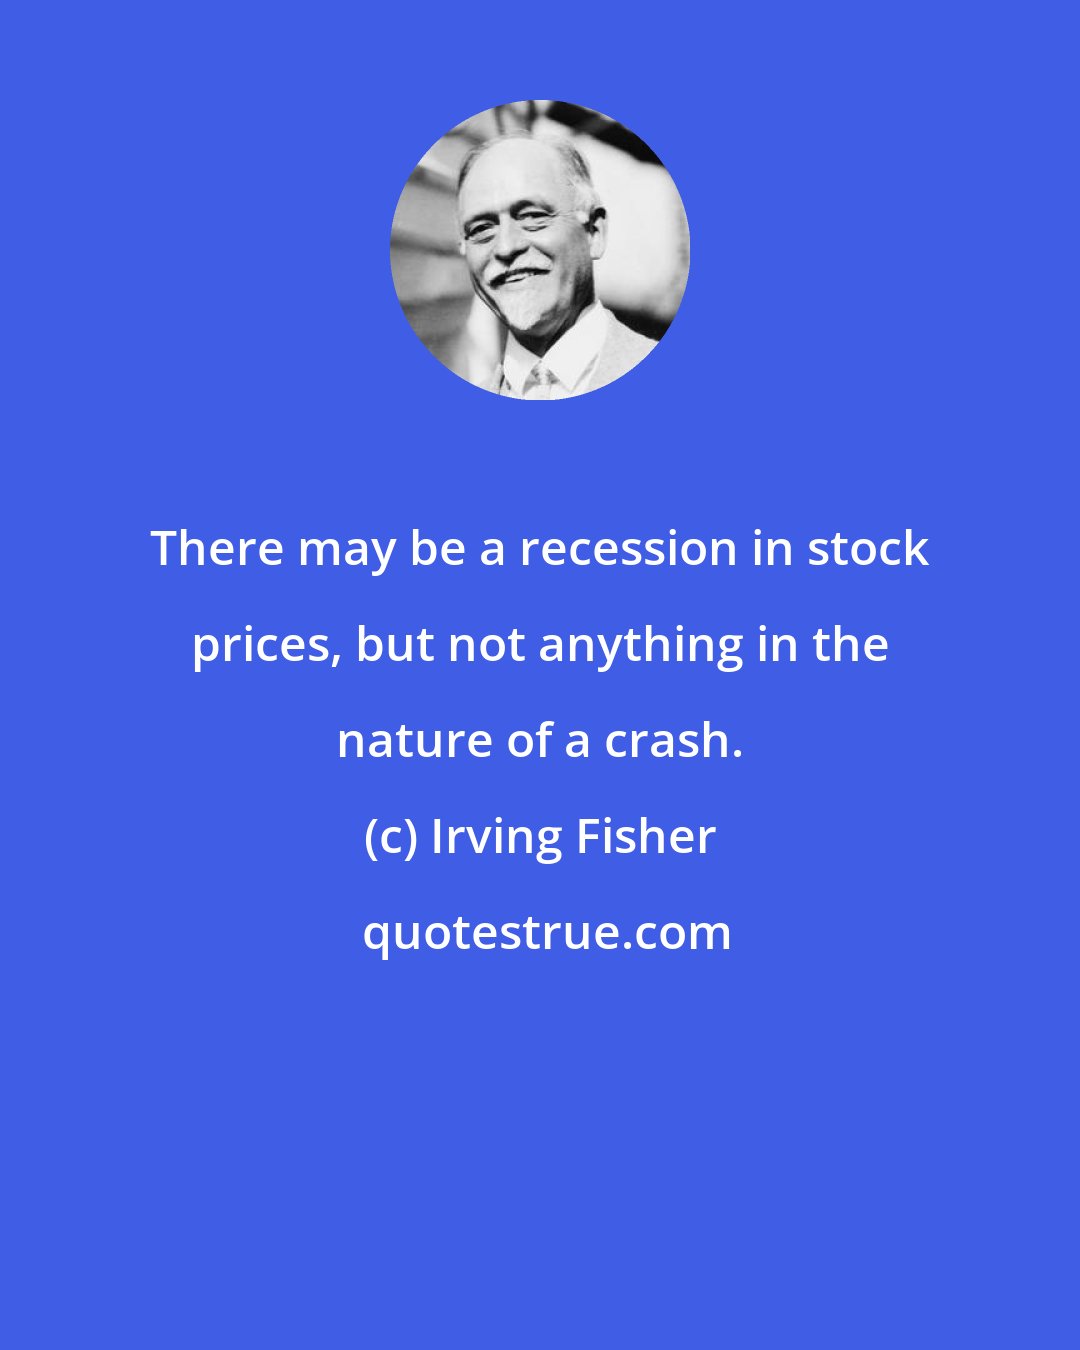 Irving Fisher: There may be a recession in stock prices, but not anything in the nature of a crash.